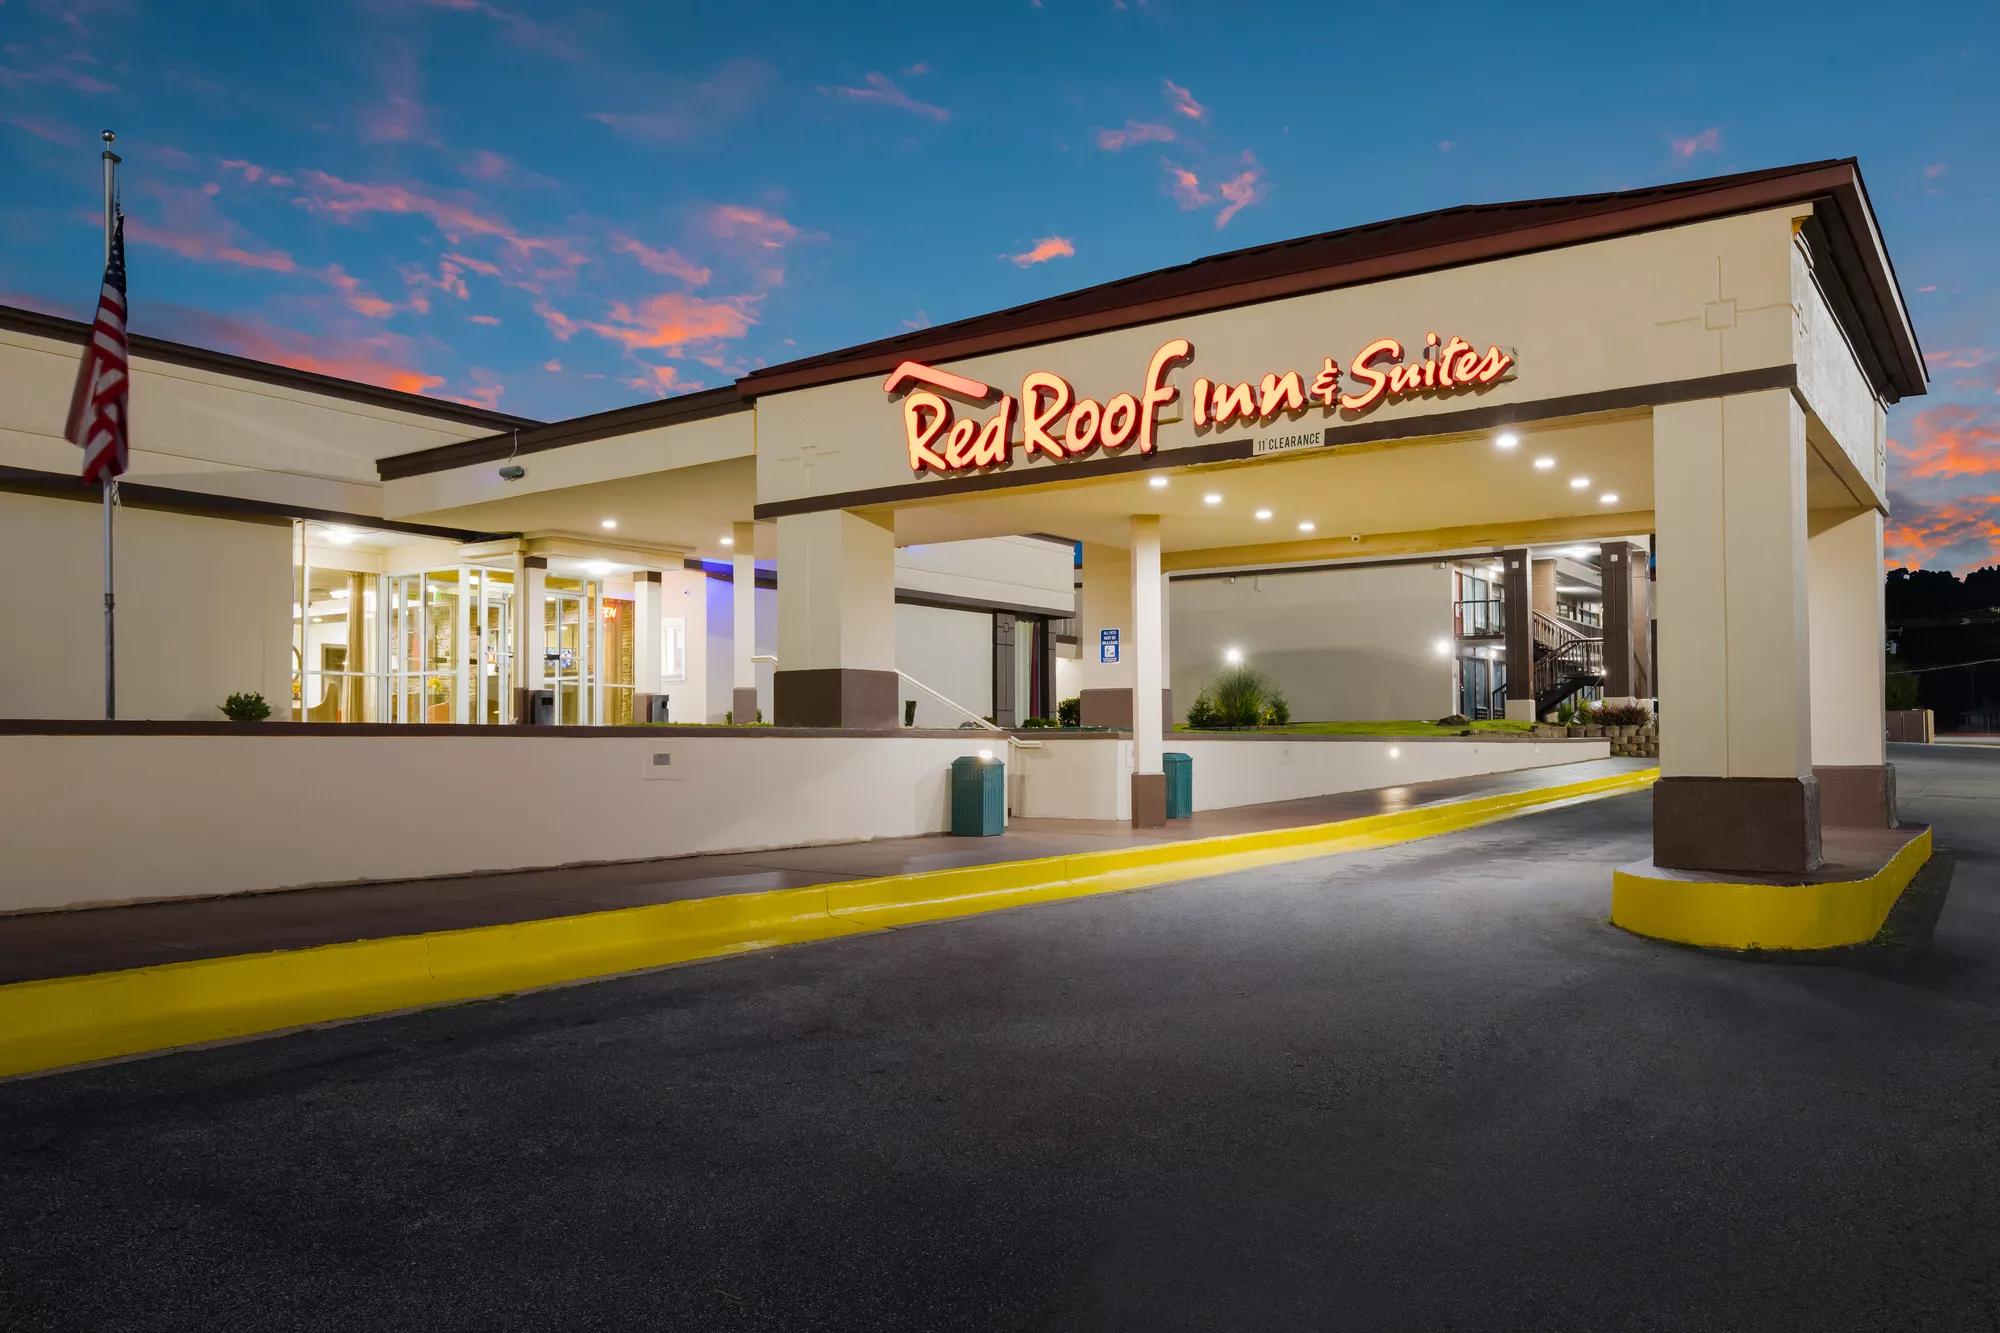 Red Roof Inn & Suites Anderson, SC Exterior Night